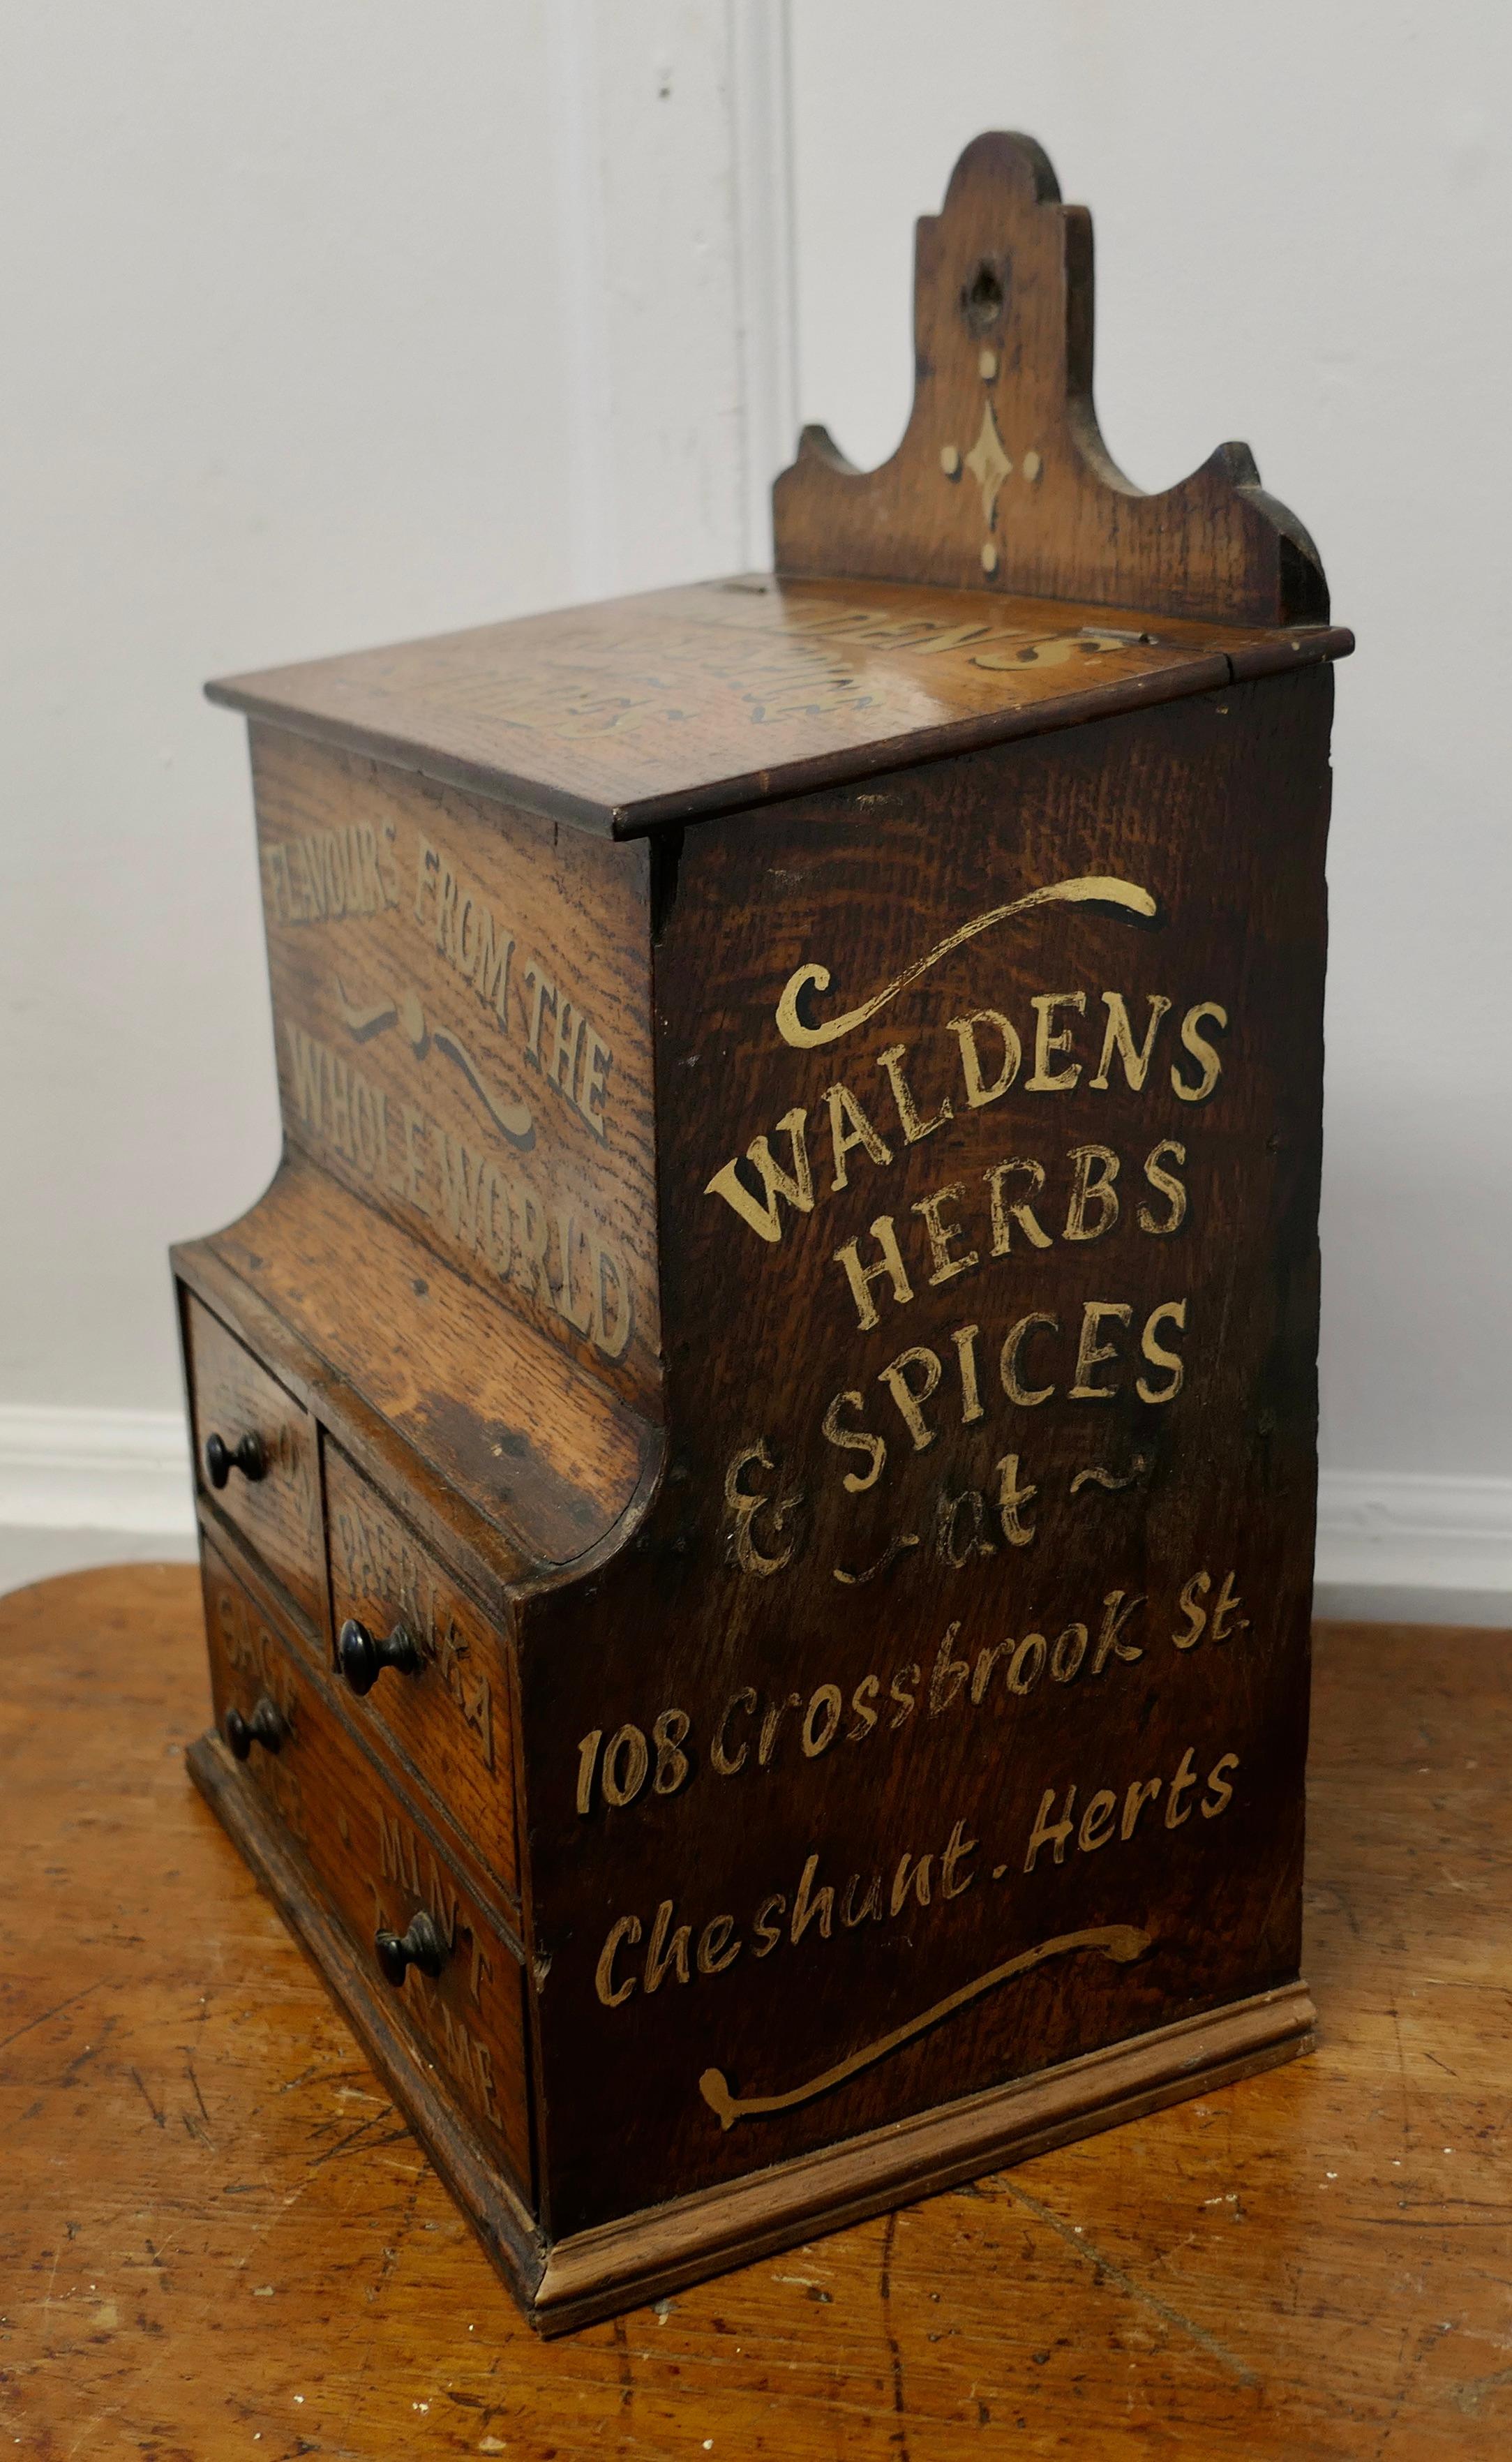 Late 19th Century Arts and Crafts Wall Hanging Salt Box with Spice Drawers  A lovely piece   For Sale